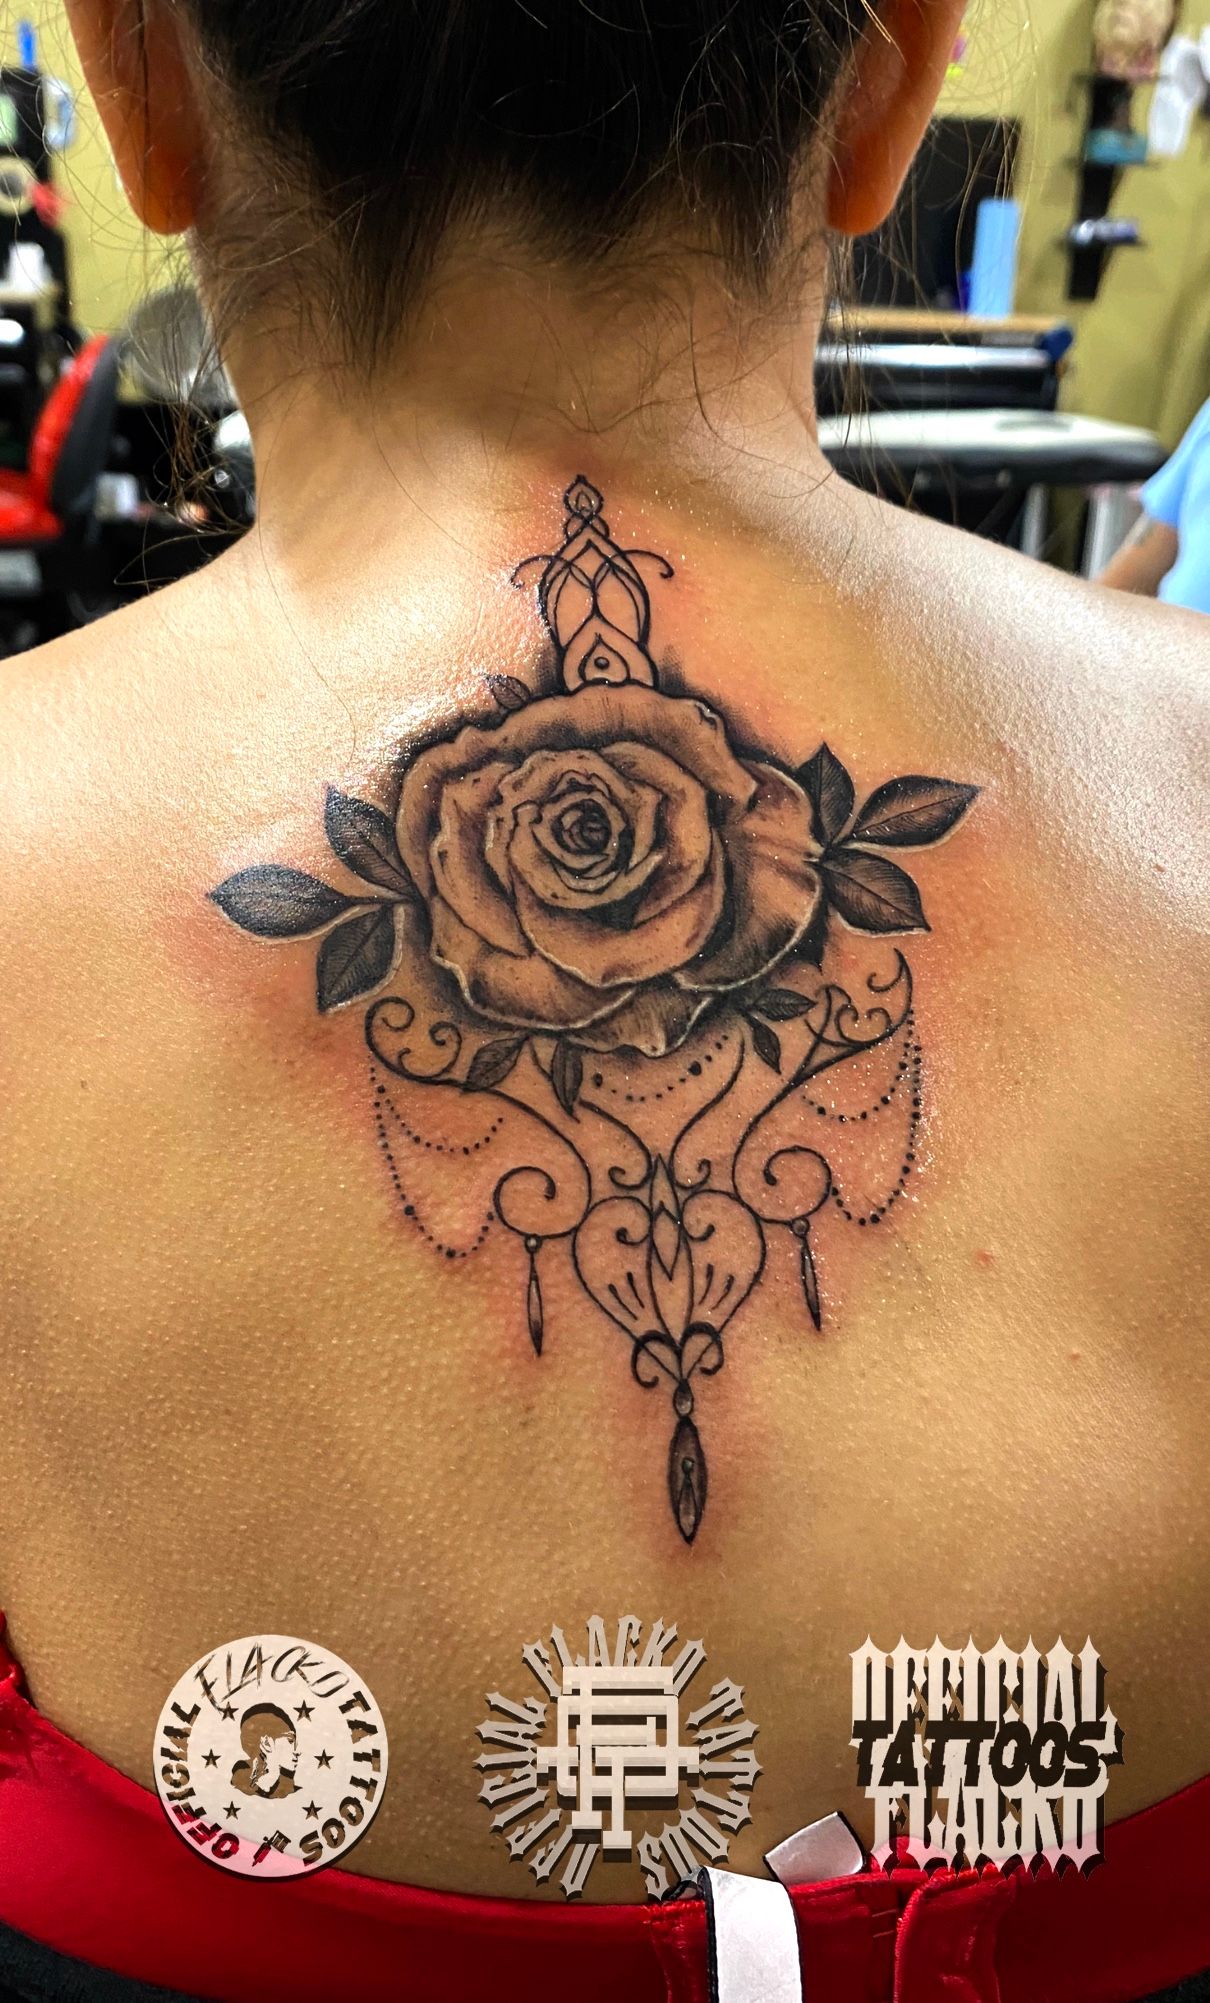 first official tattoo !! done at Hold True Tattoo in Charlotte NC : r/ tattoos